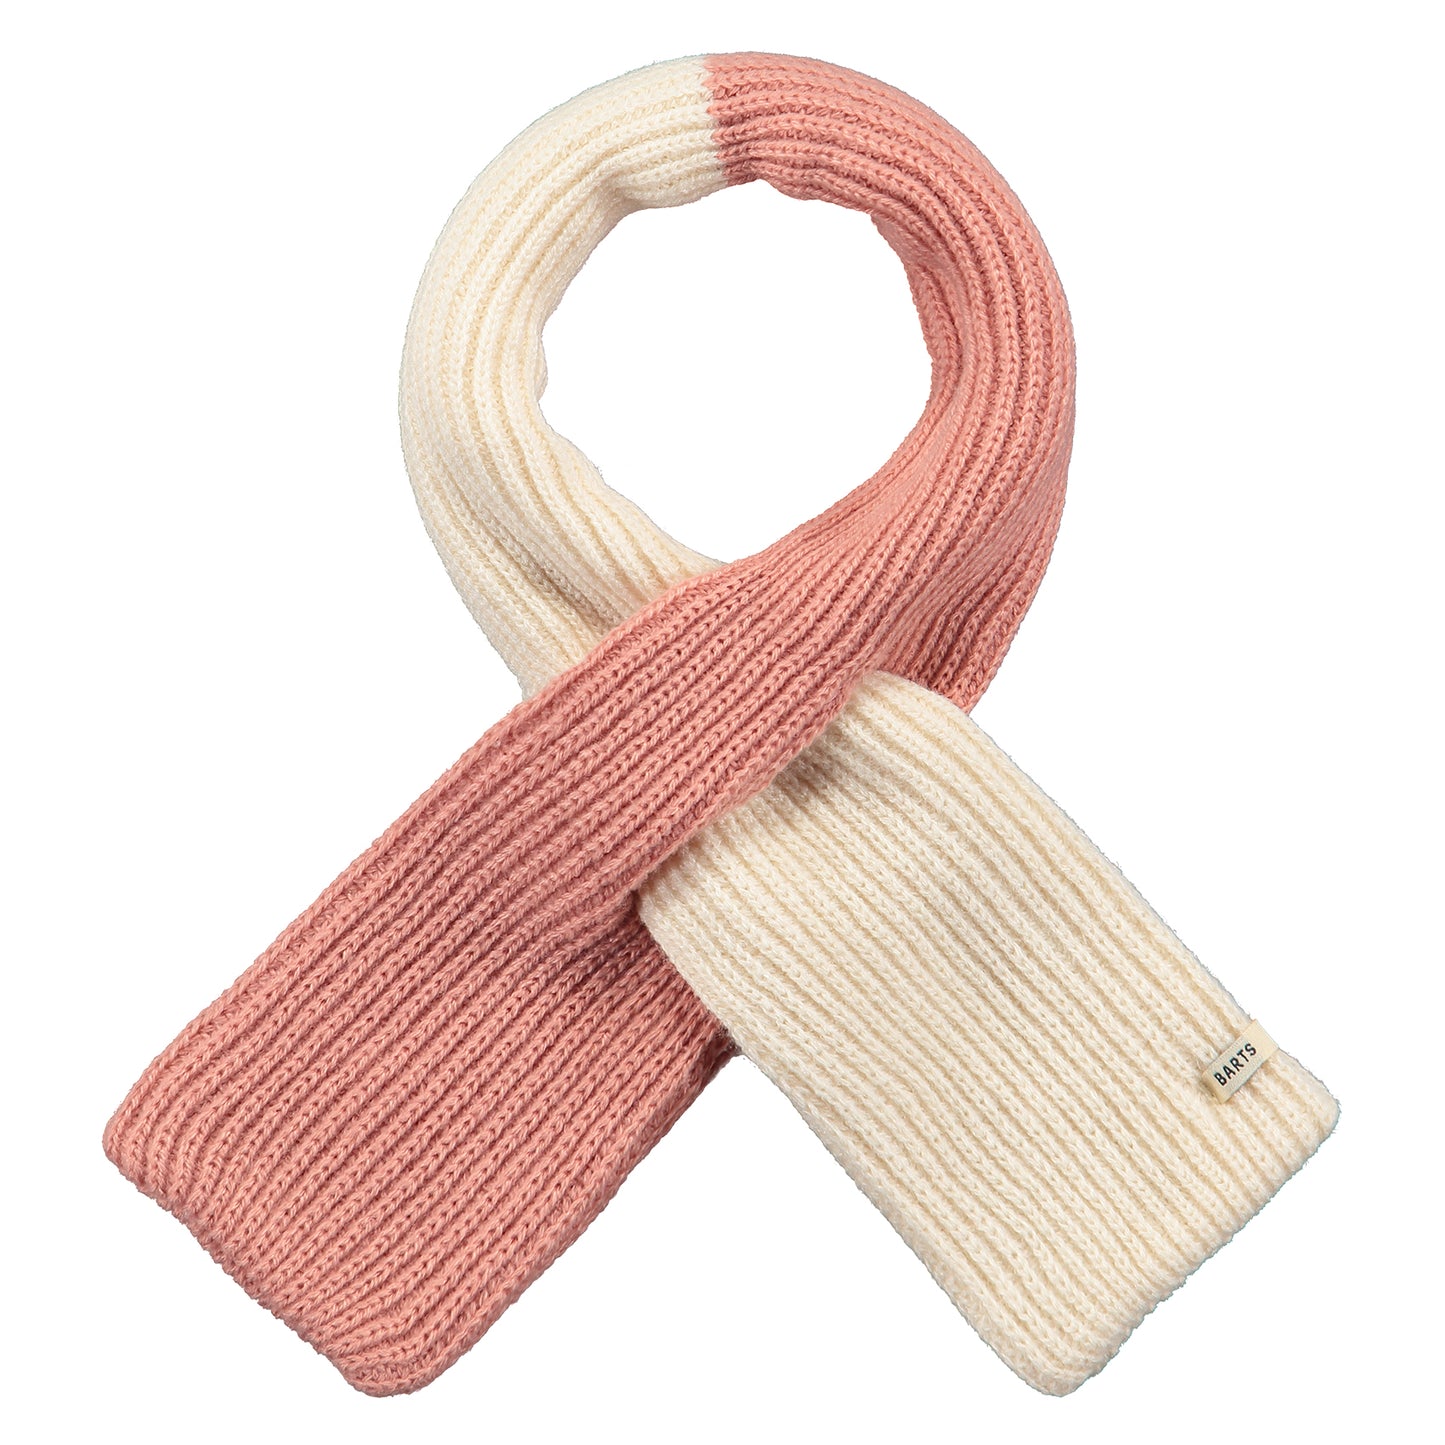 BARTS - milo scarf - dusty pink - one size